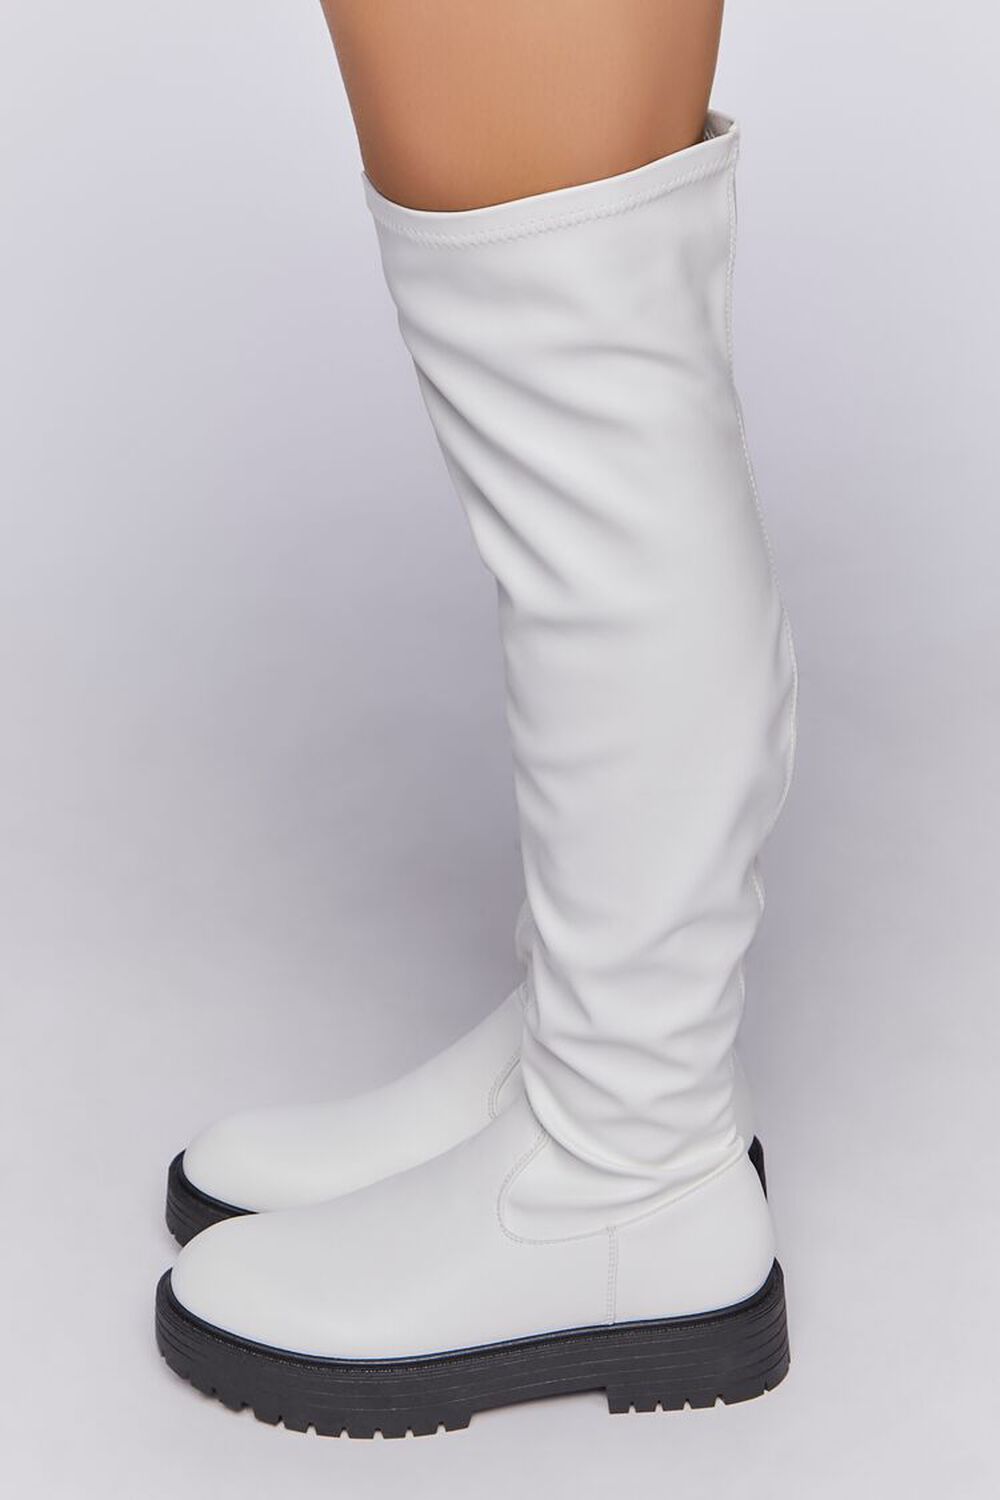 WHITE Over-the-Knee Lug-Sole Boots, image 2